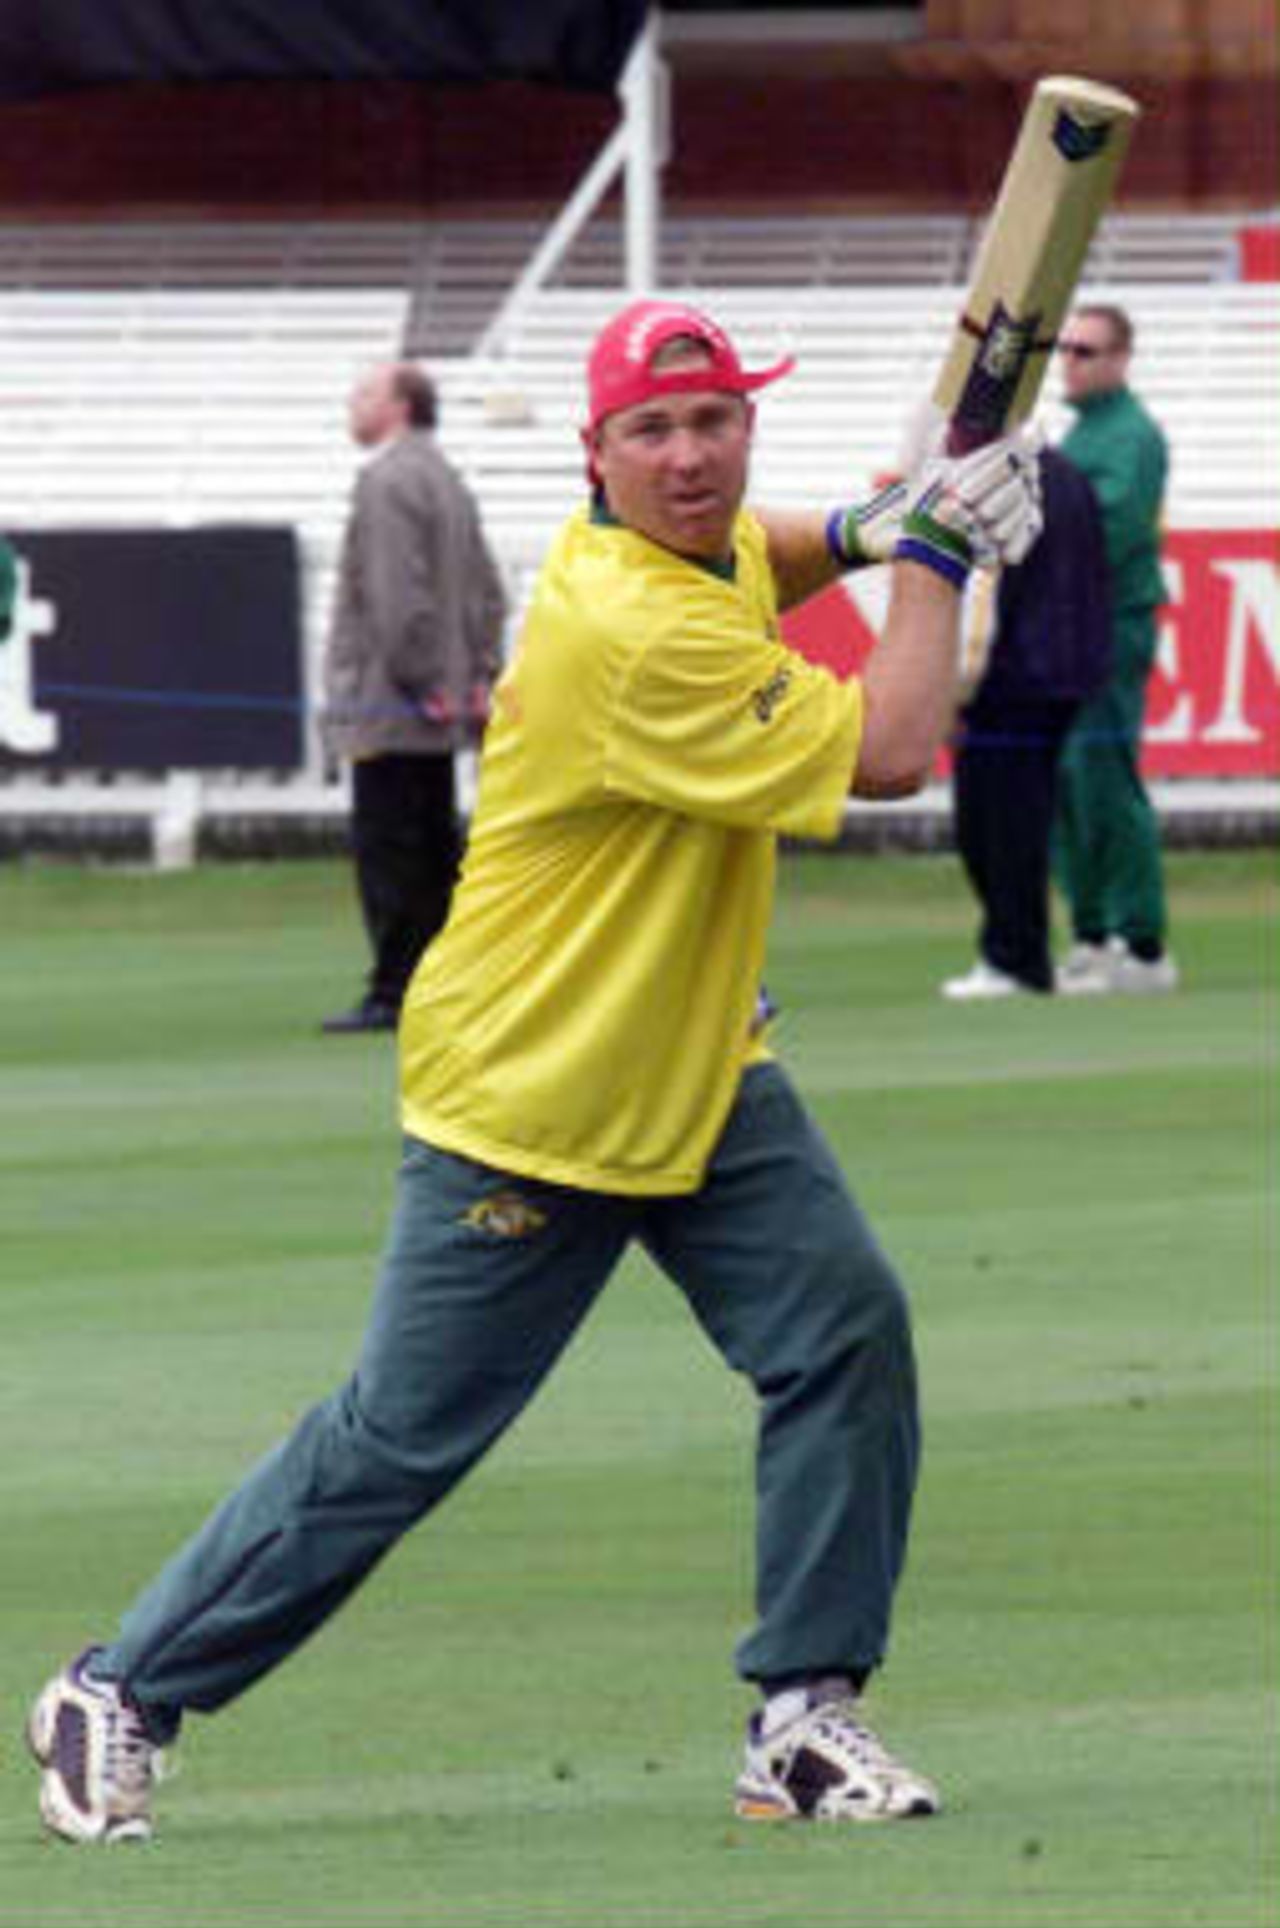 Shane Warne of Australia puts in some light batting practice prior to the start of the World Cup Cricket Final where he hopes to do more damage against the Pakistani team, at Lords, in London.